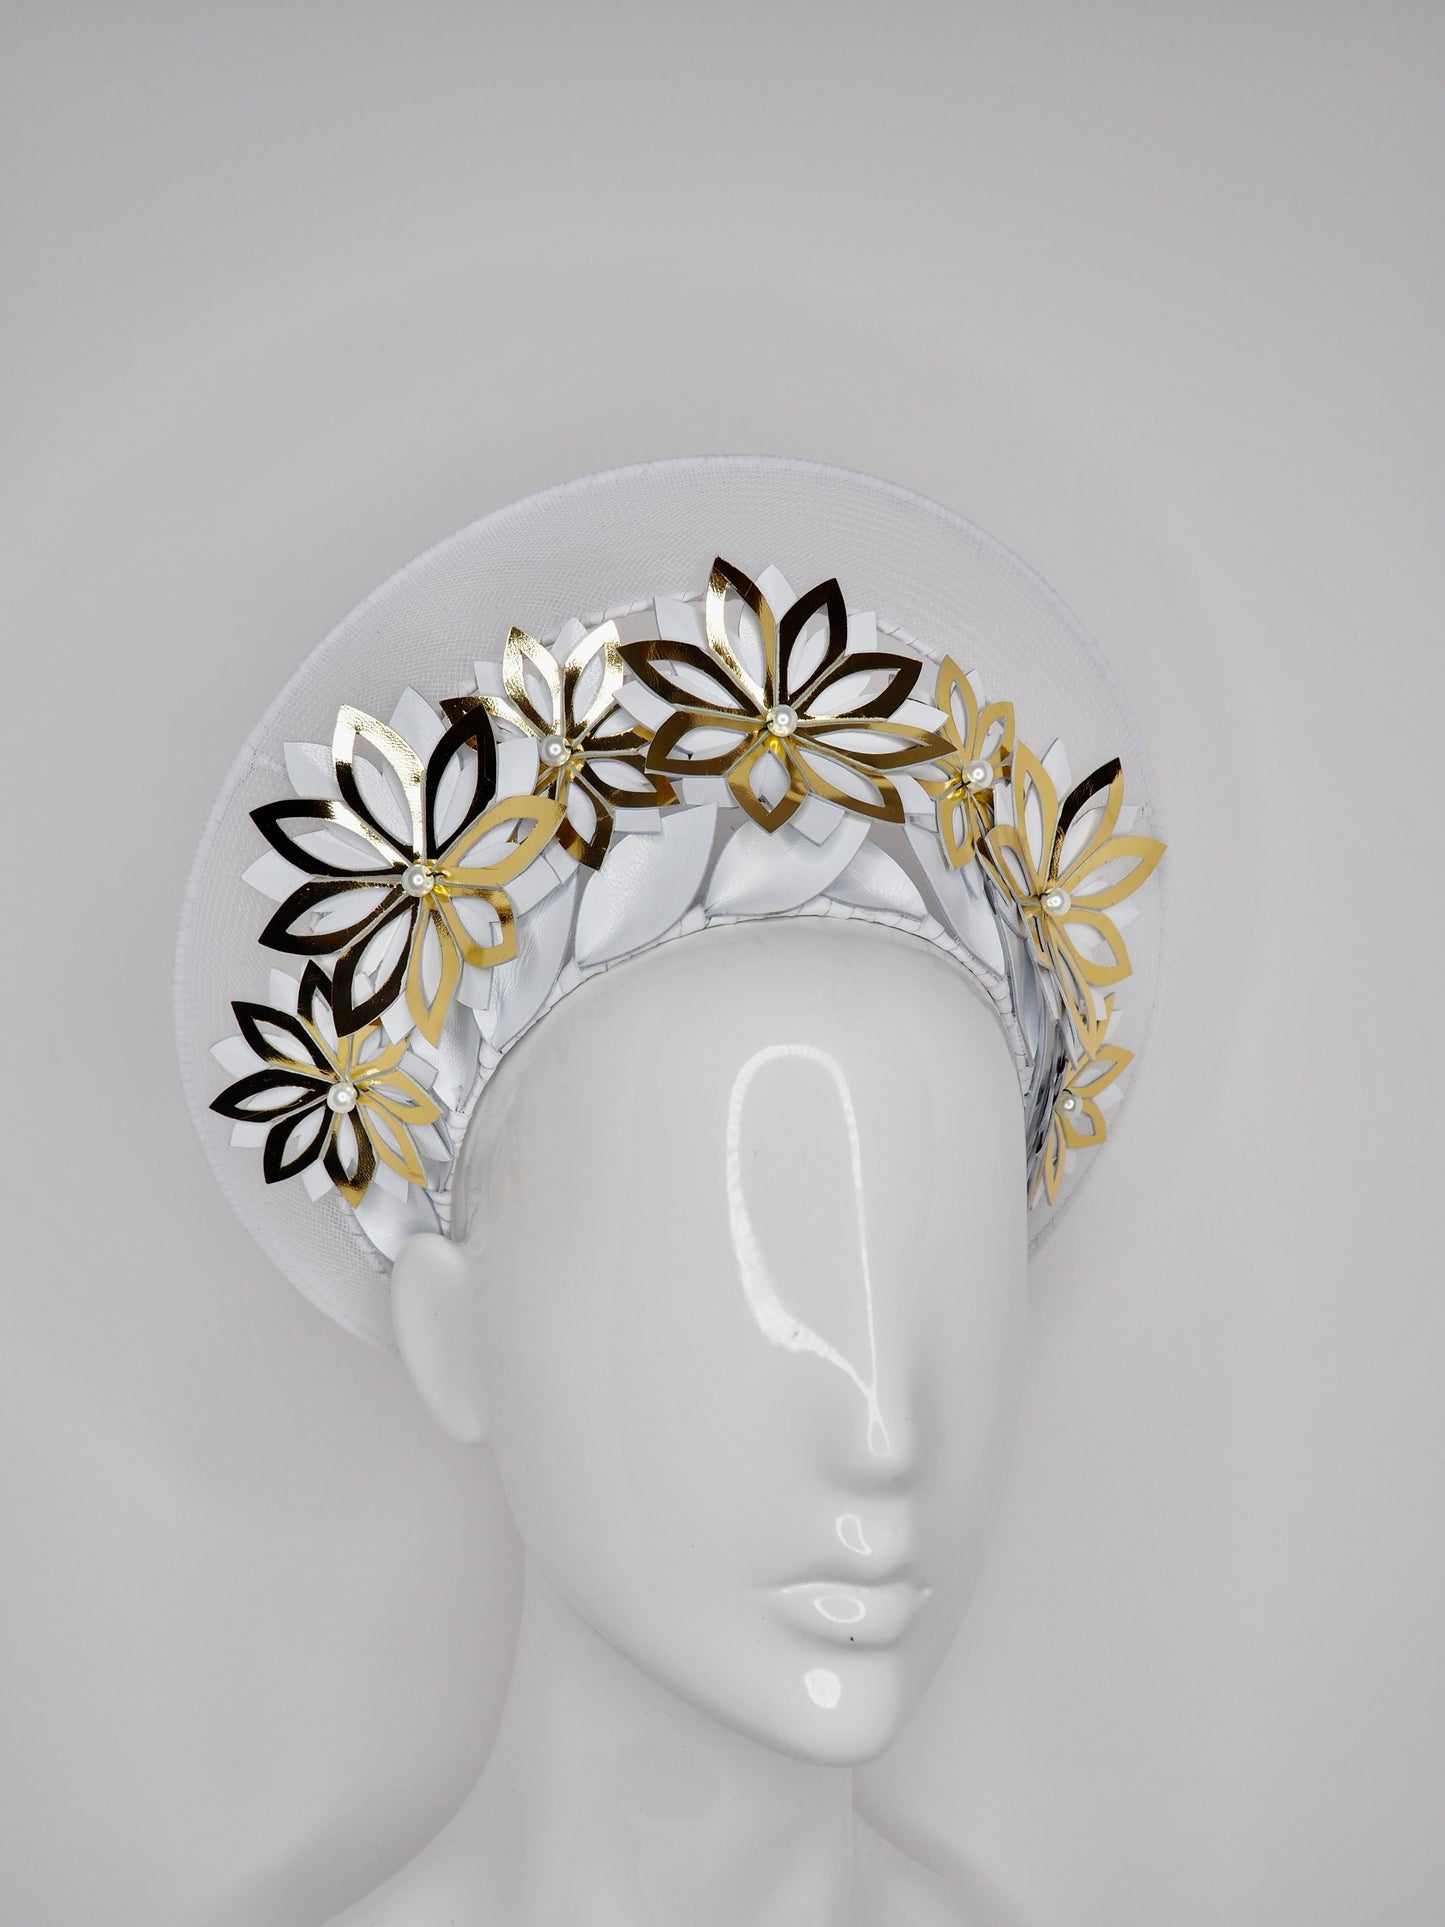 Hello Halo - Gold gloss leather cutout flowers with wired crinoline halo and white details